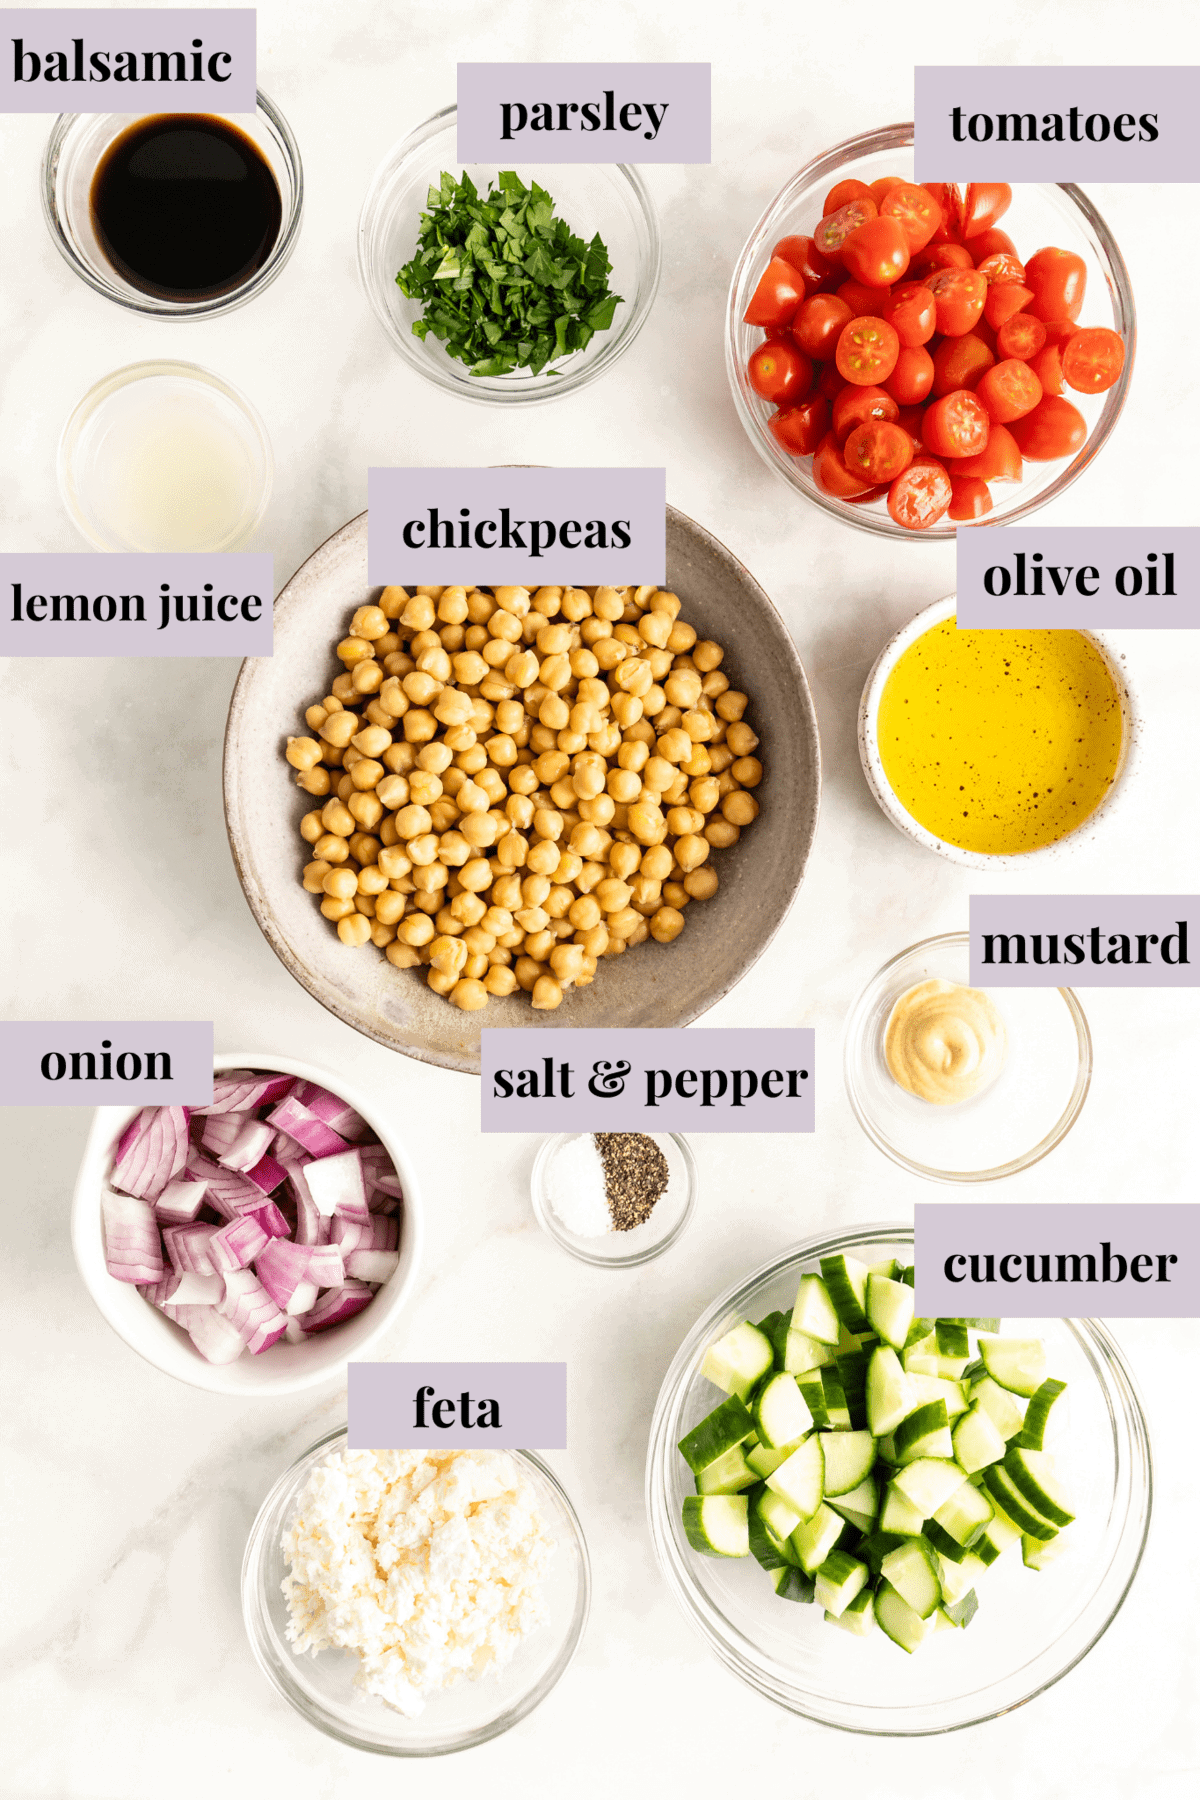 Ingredients for chickpea salad.